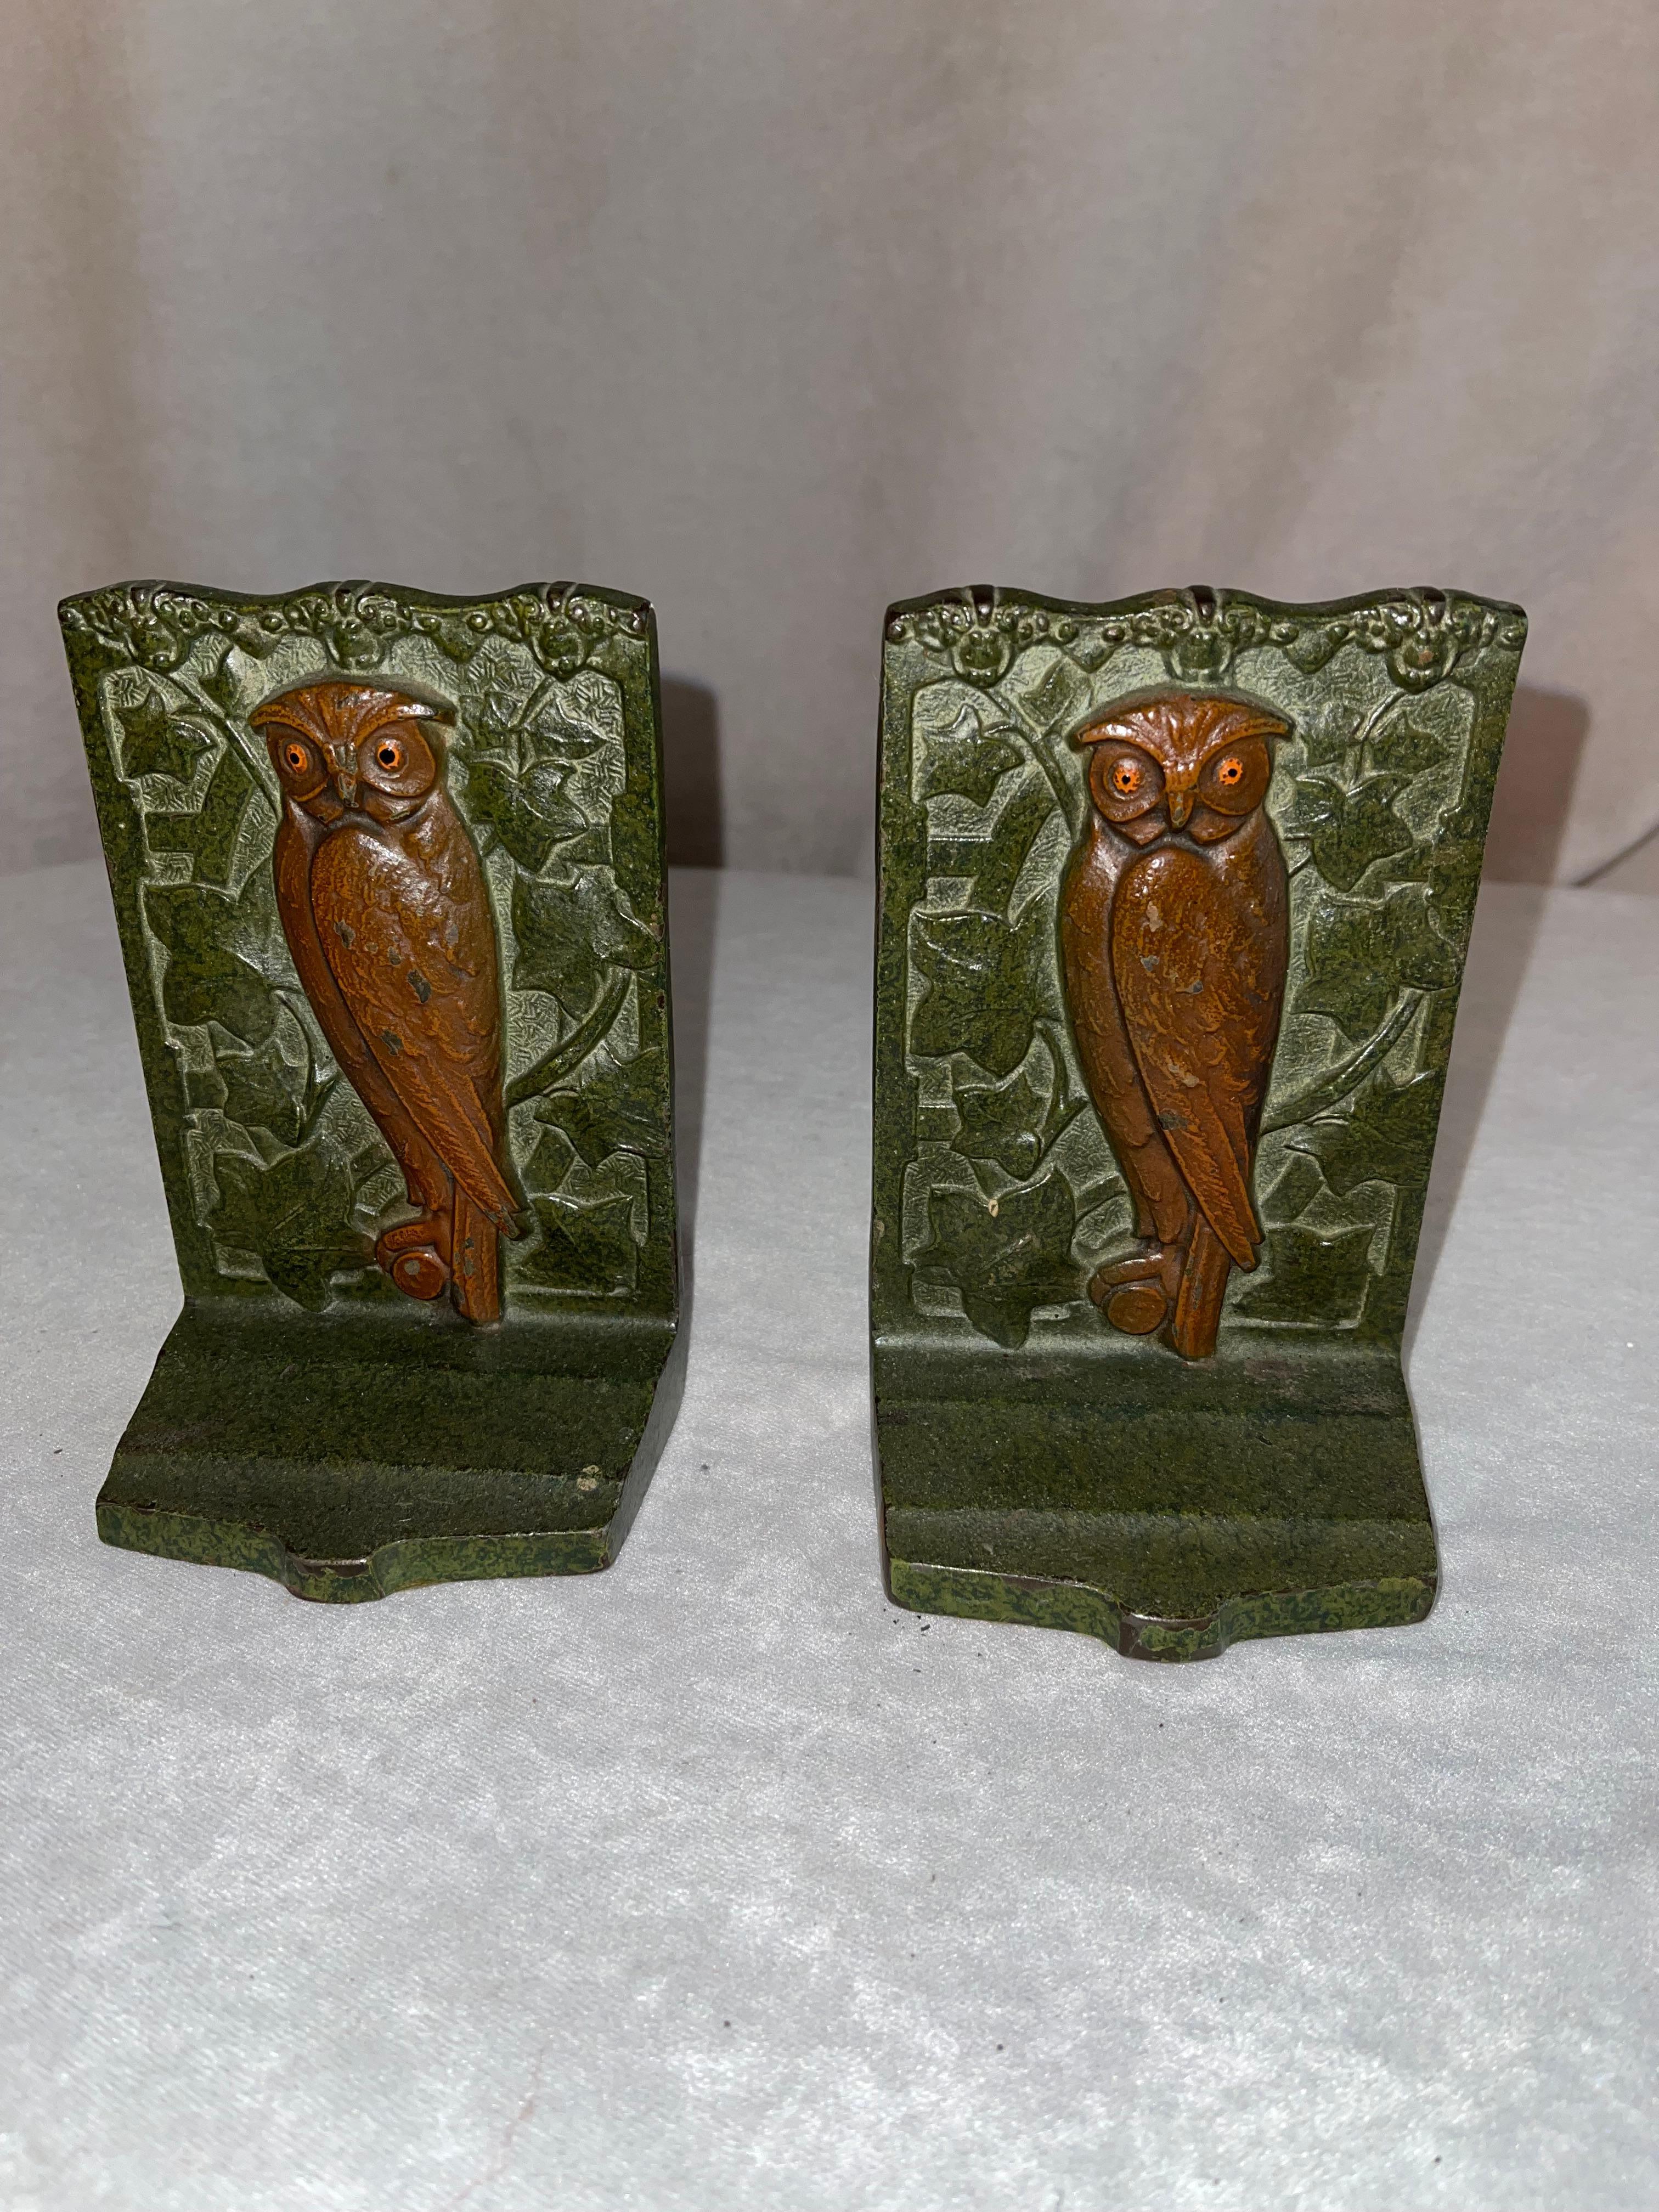 These bookends are top of the line work by Judd Co. The detailing is exceptional, and the green patina helps show off that work. The art nouveau flowing leaves really enhances the look. 
 These are really exceptional and the only real wear is on